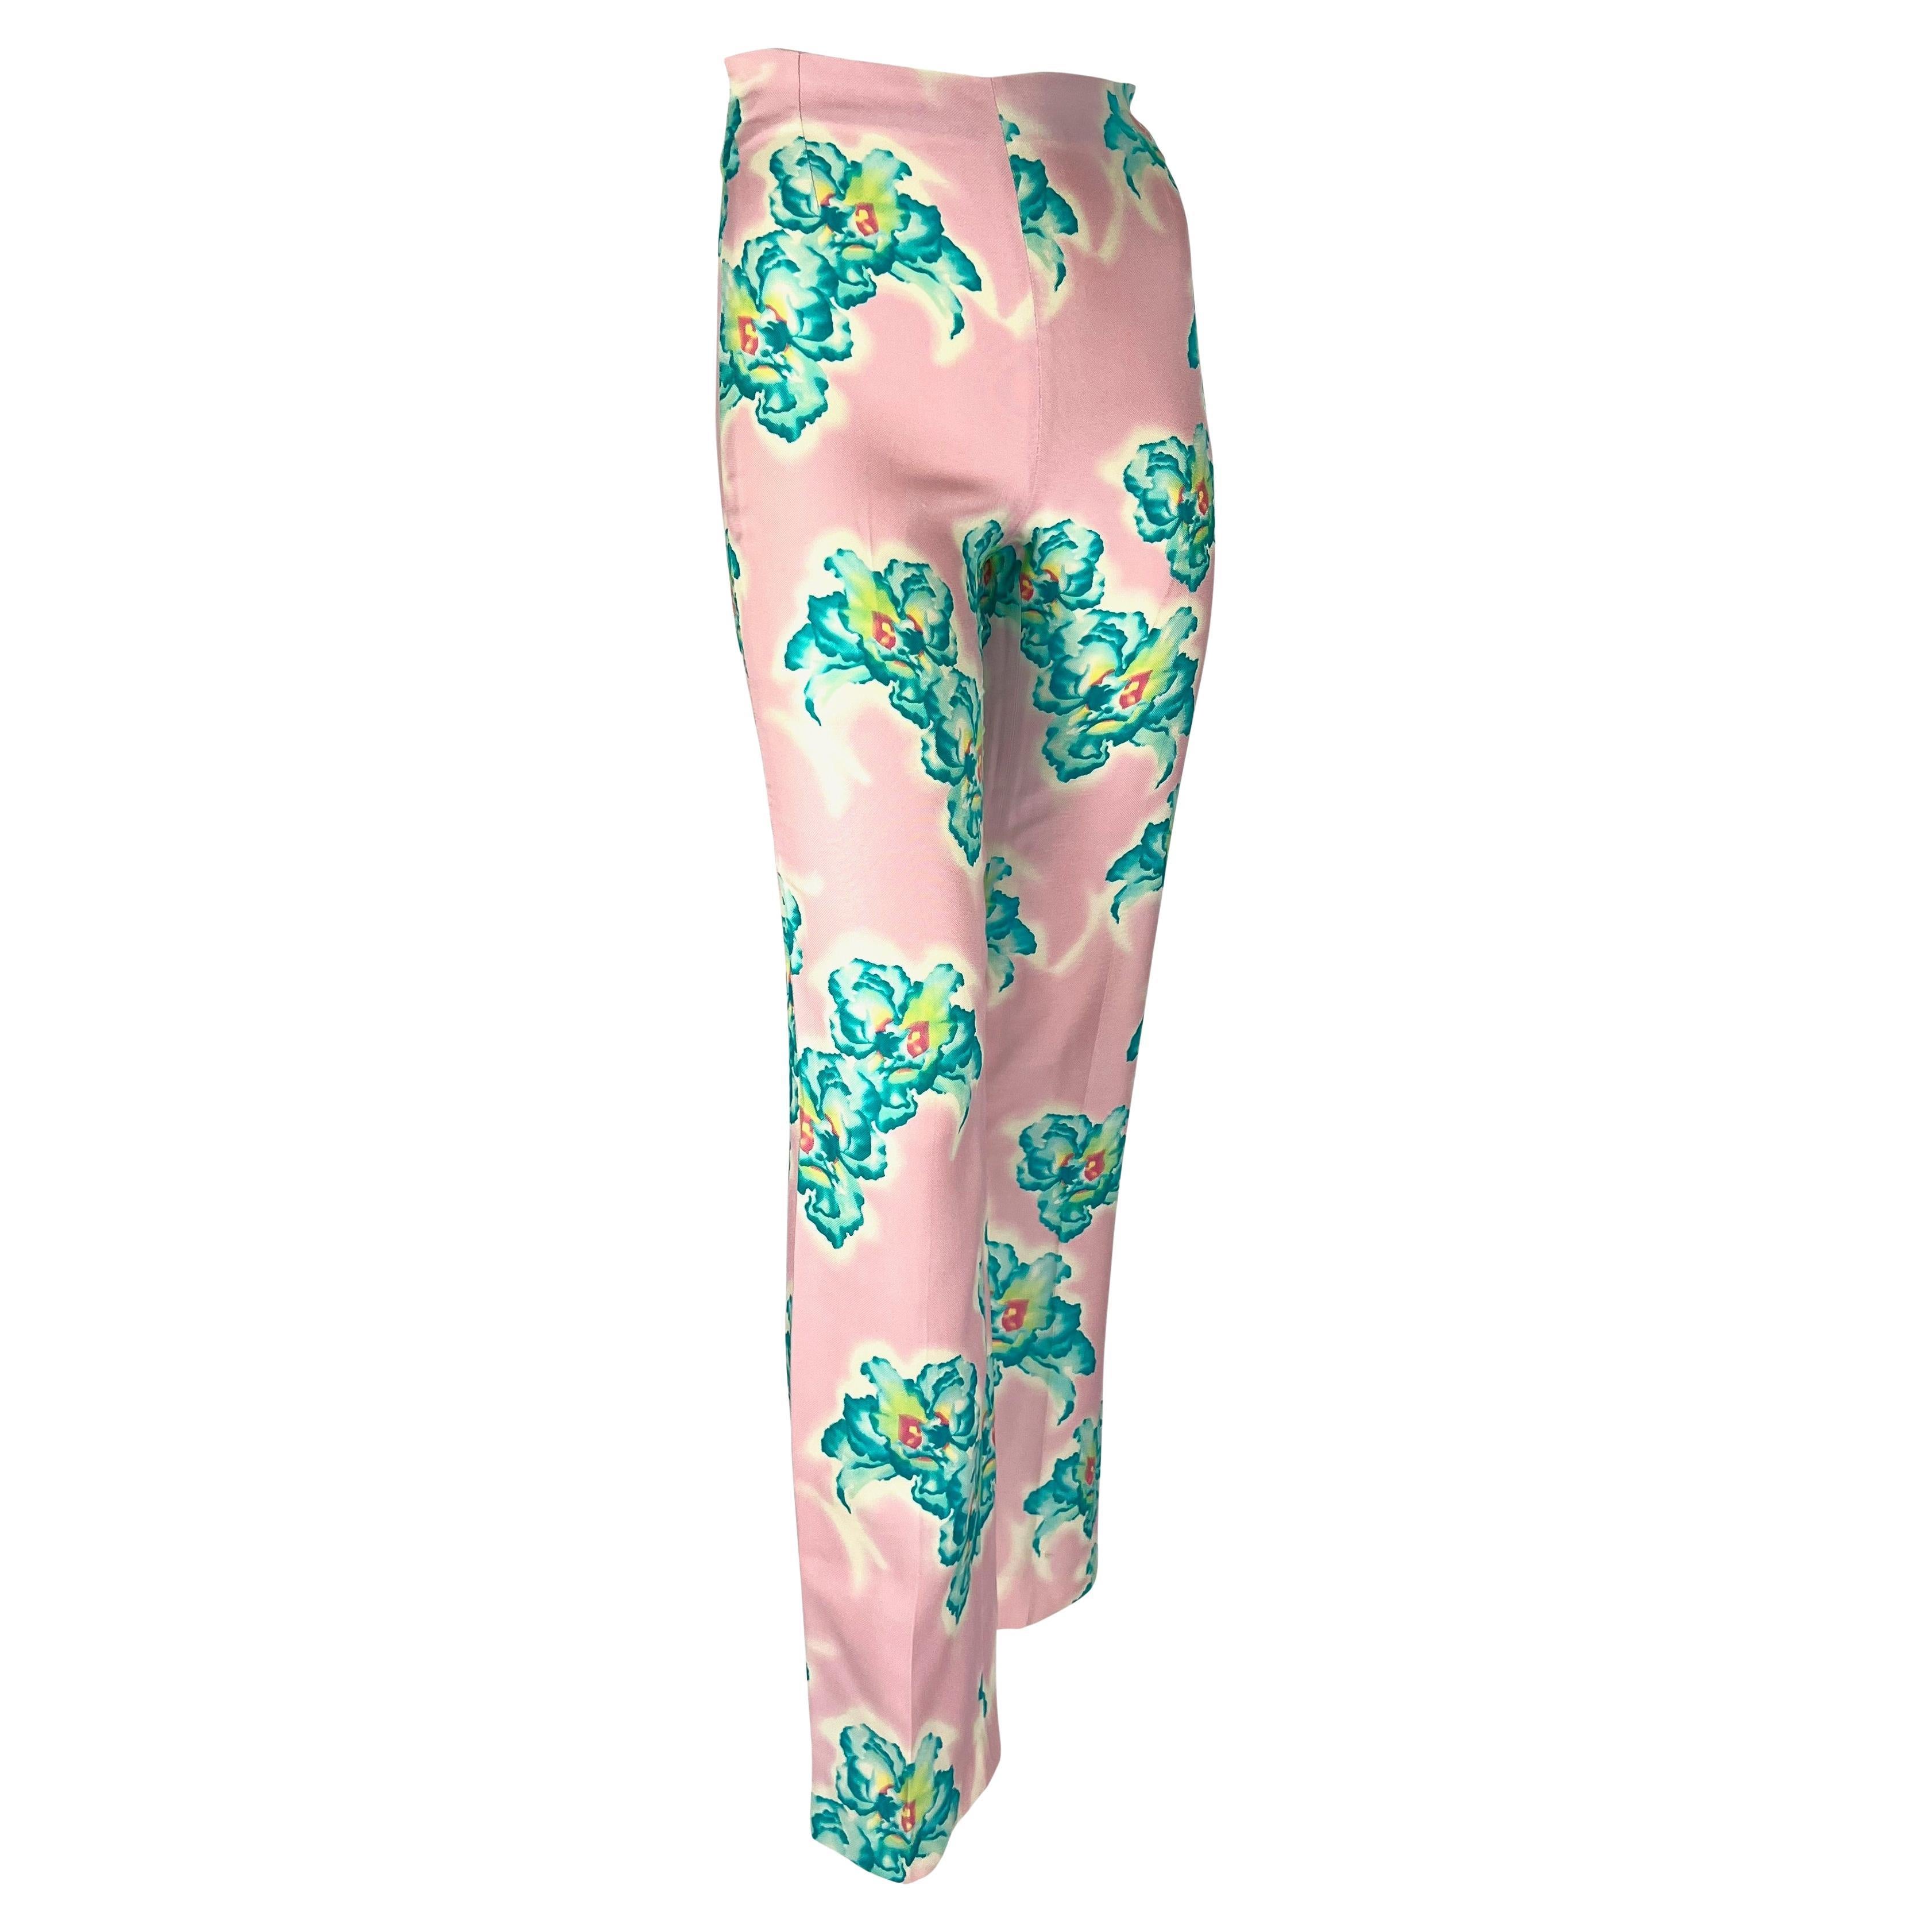 S/S 1999 Gianni Versace by Donatella Pink Blue Orchid Print Silk Cropped Pants For Sale 5